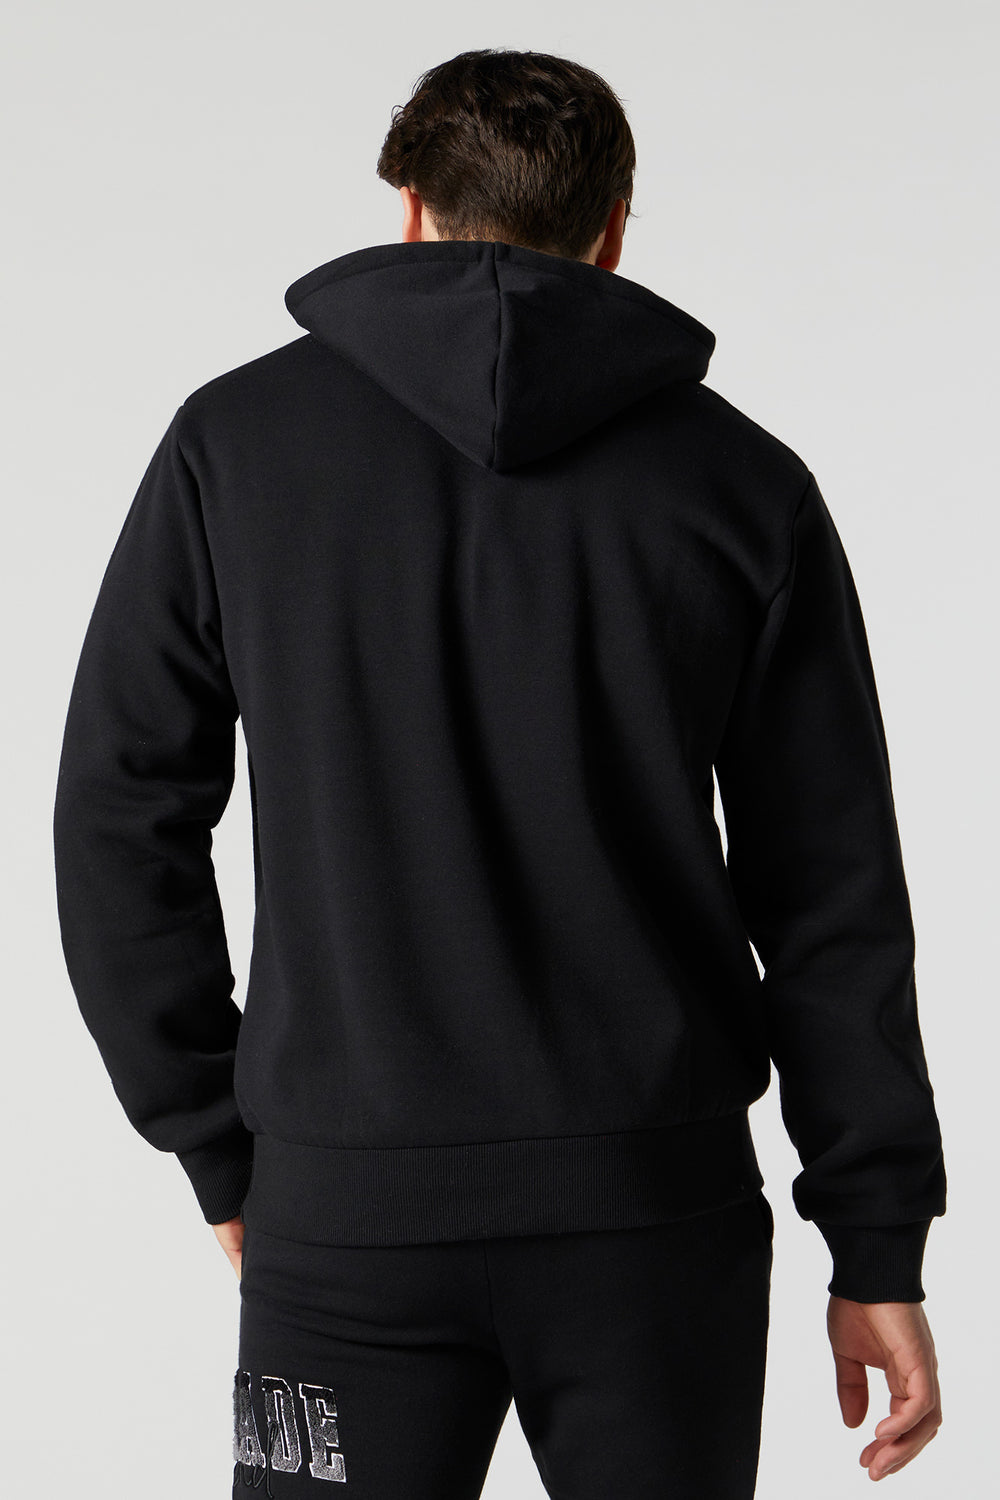 Self Made Legend Chenille Embroidered Hoodie Self Made Legend Chenille Embroidered Hoodie 6